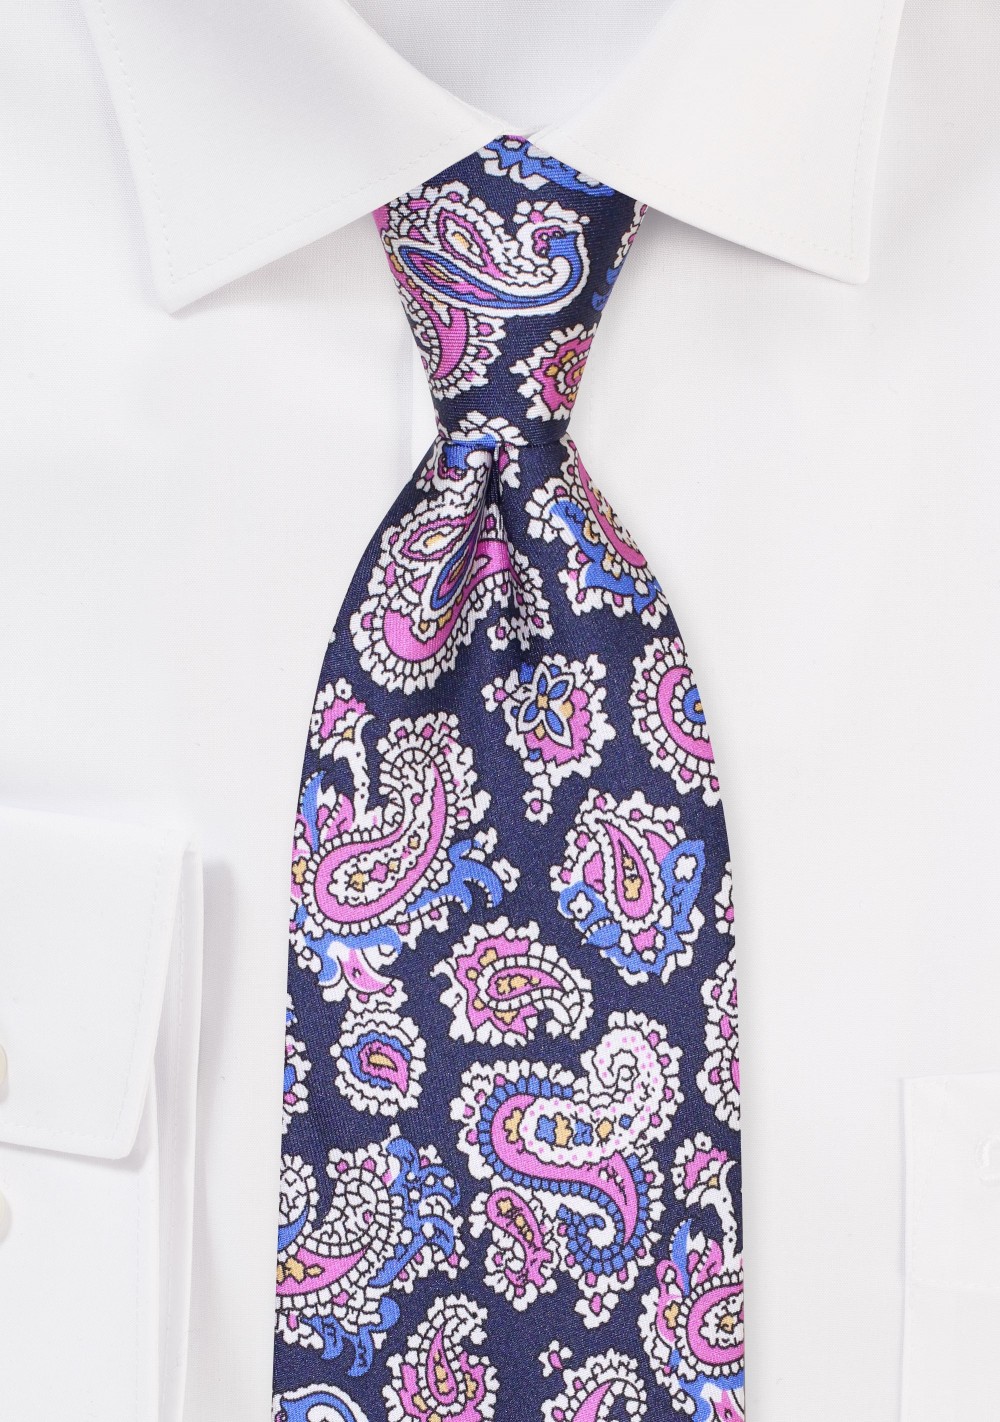 Intricate Paisley Print Tie in Navy, Pink, White